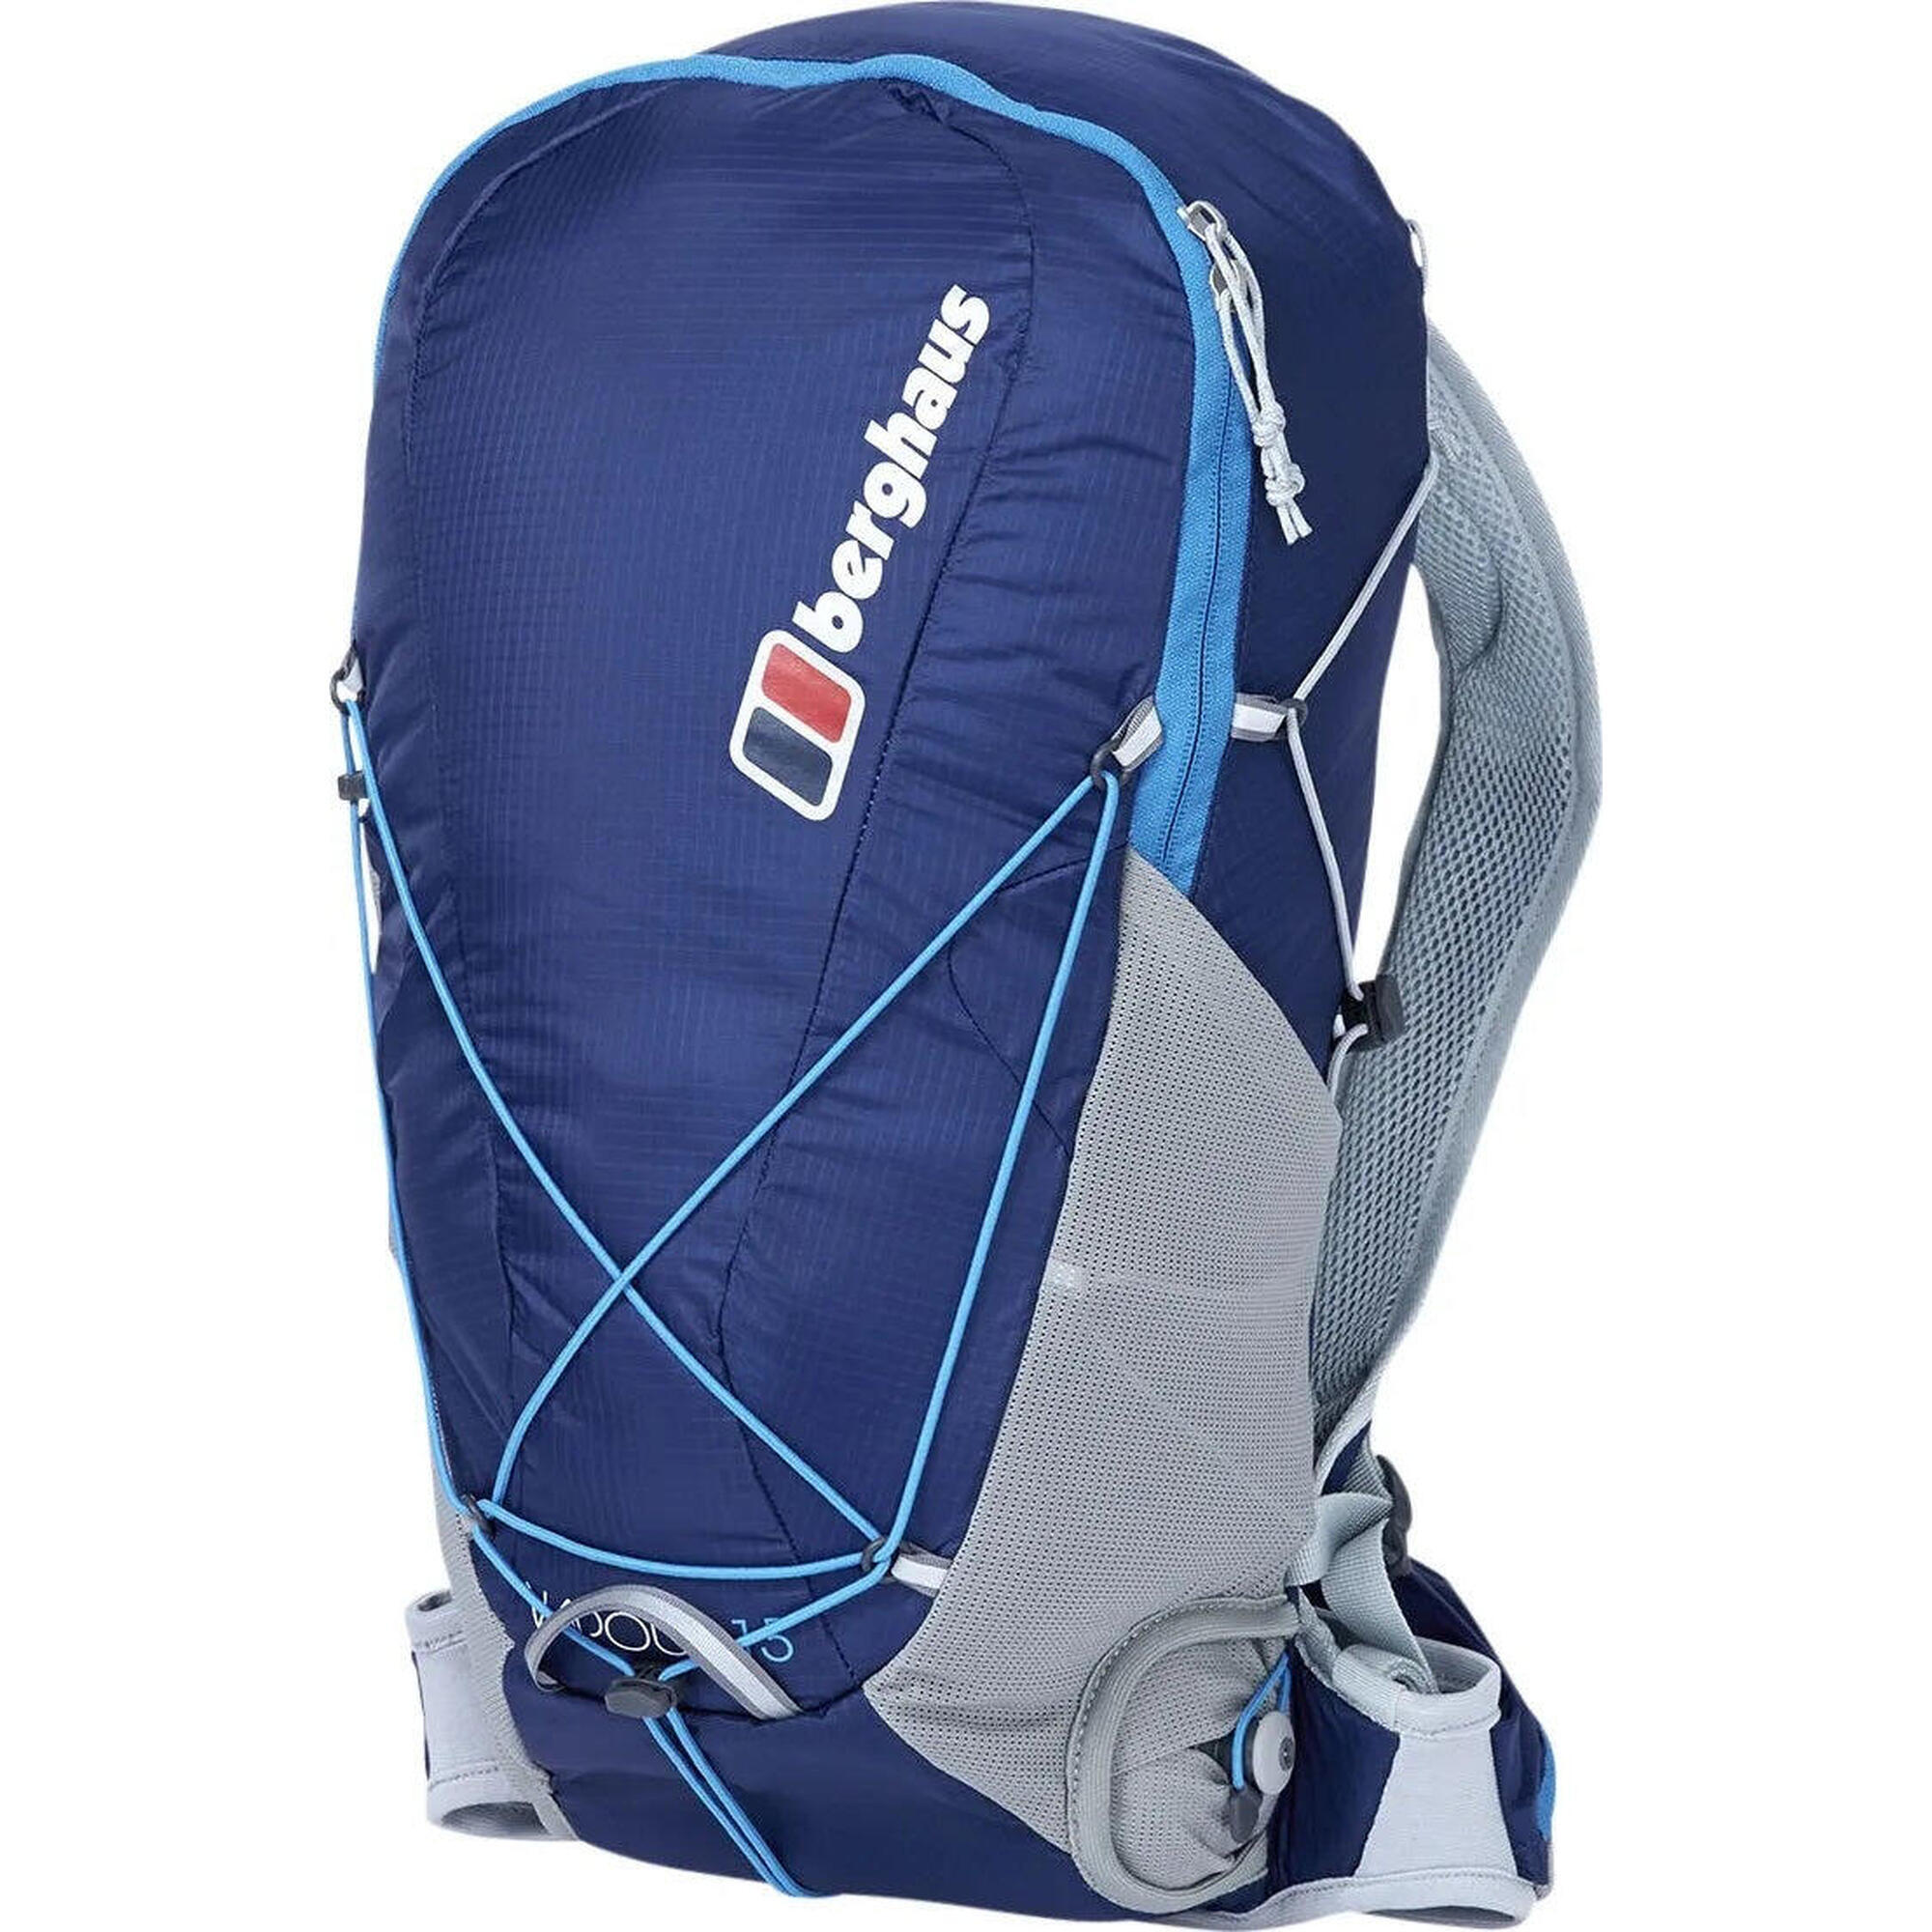 Vapour 15 Light Weight Hiking Backpack 15L - Blue